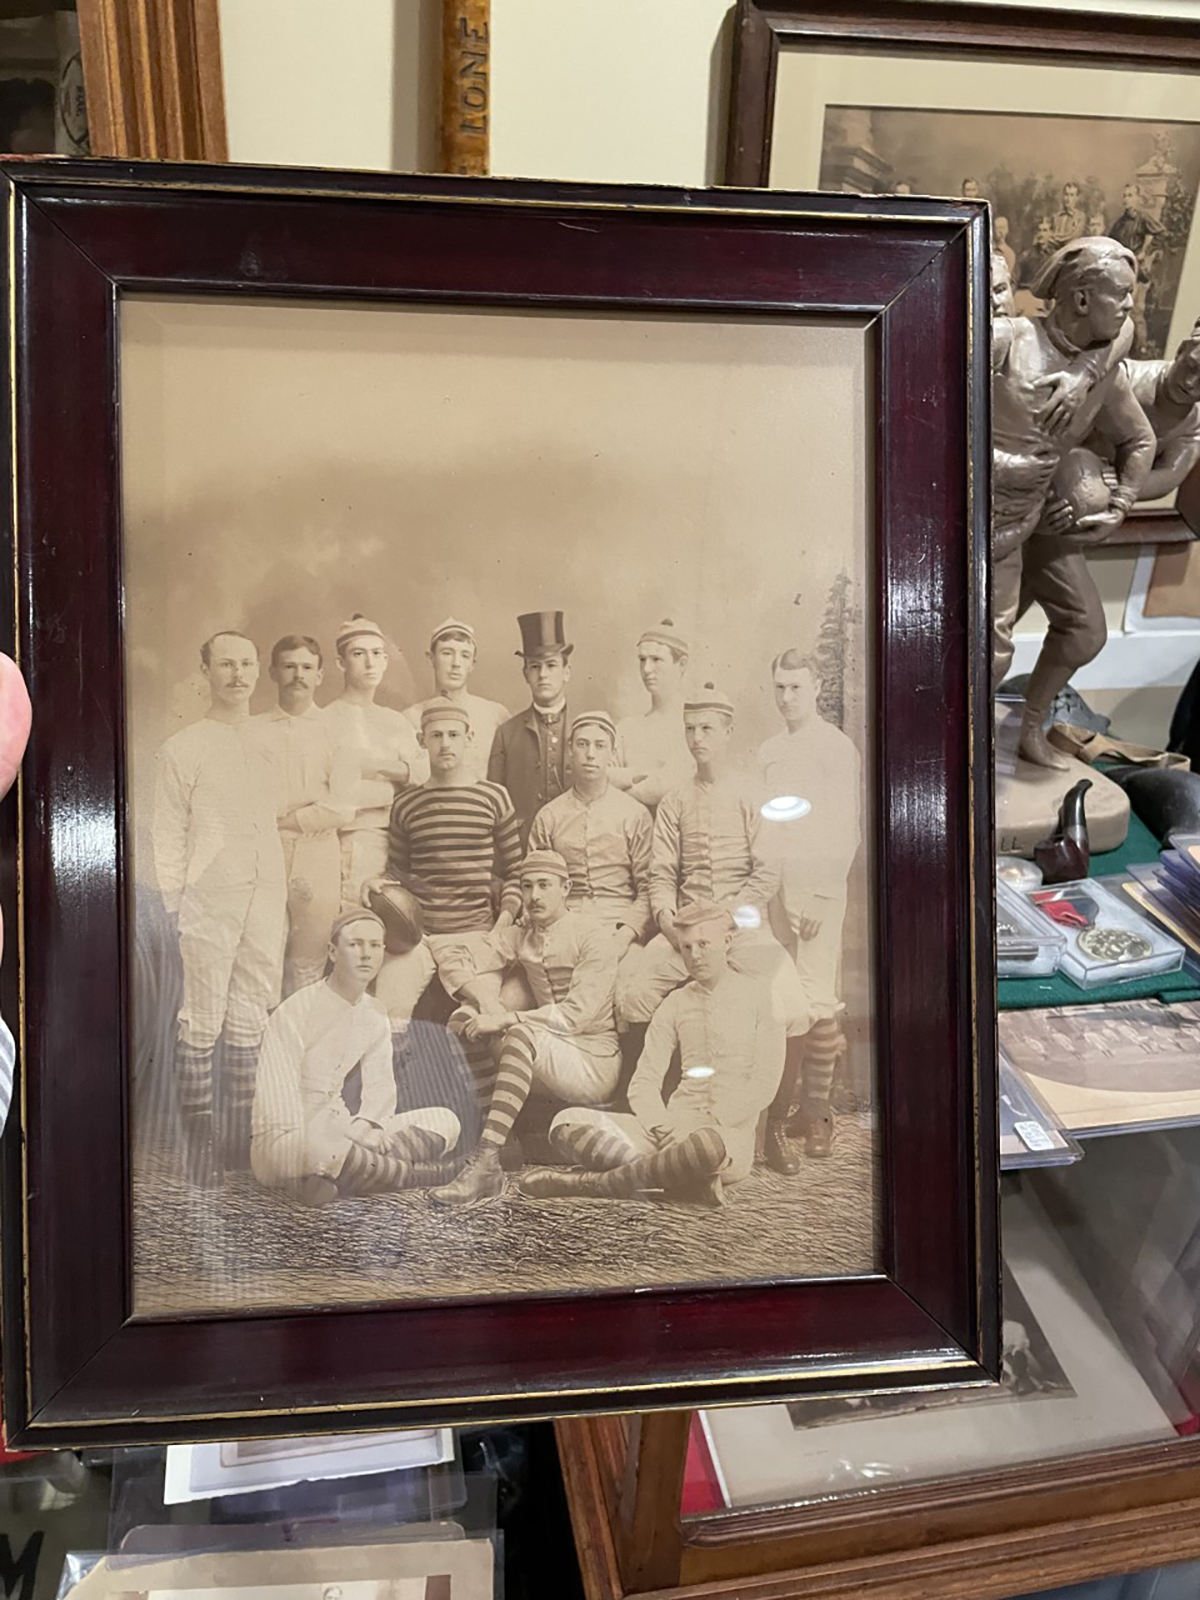 1881 Penn team that played rugby union